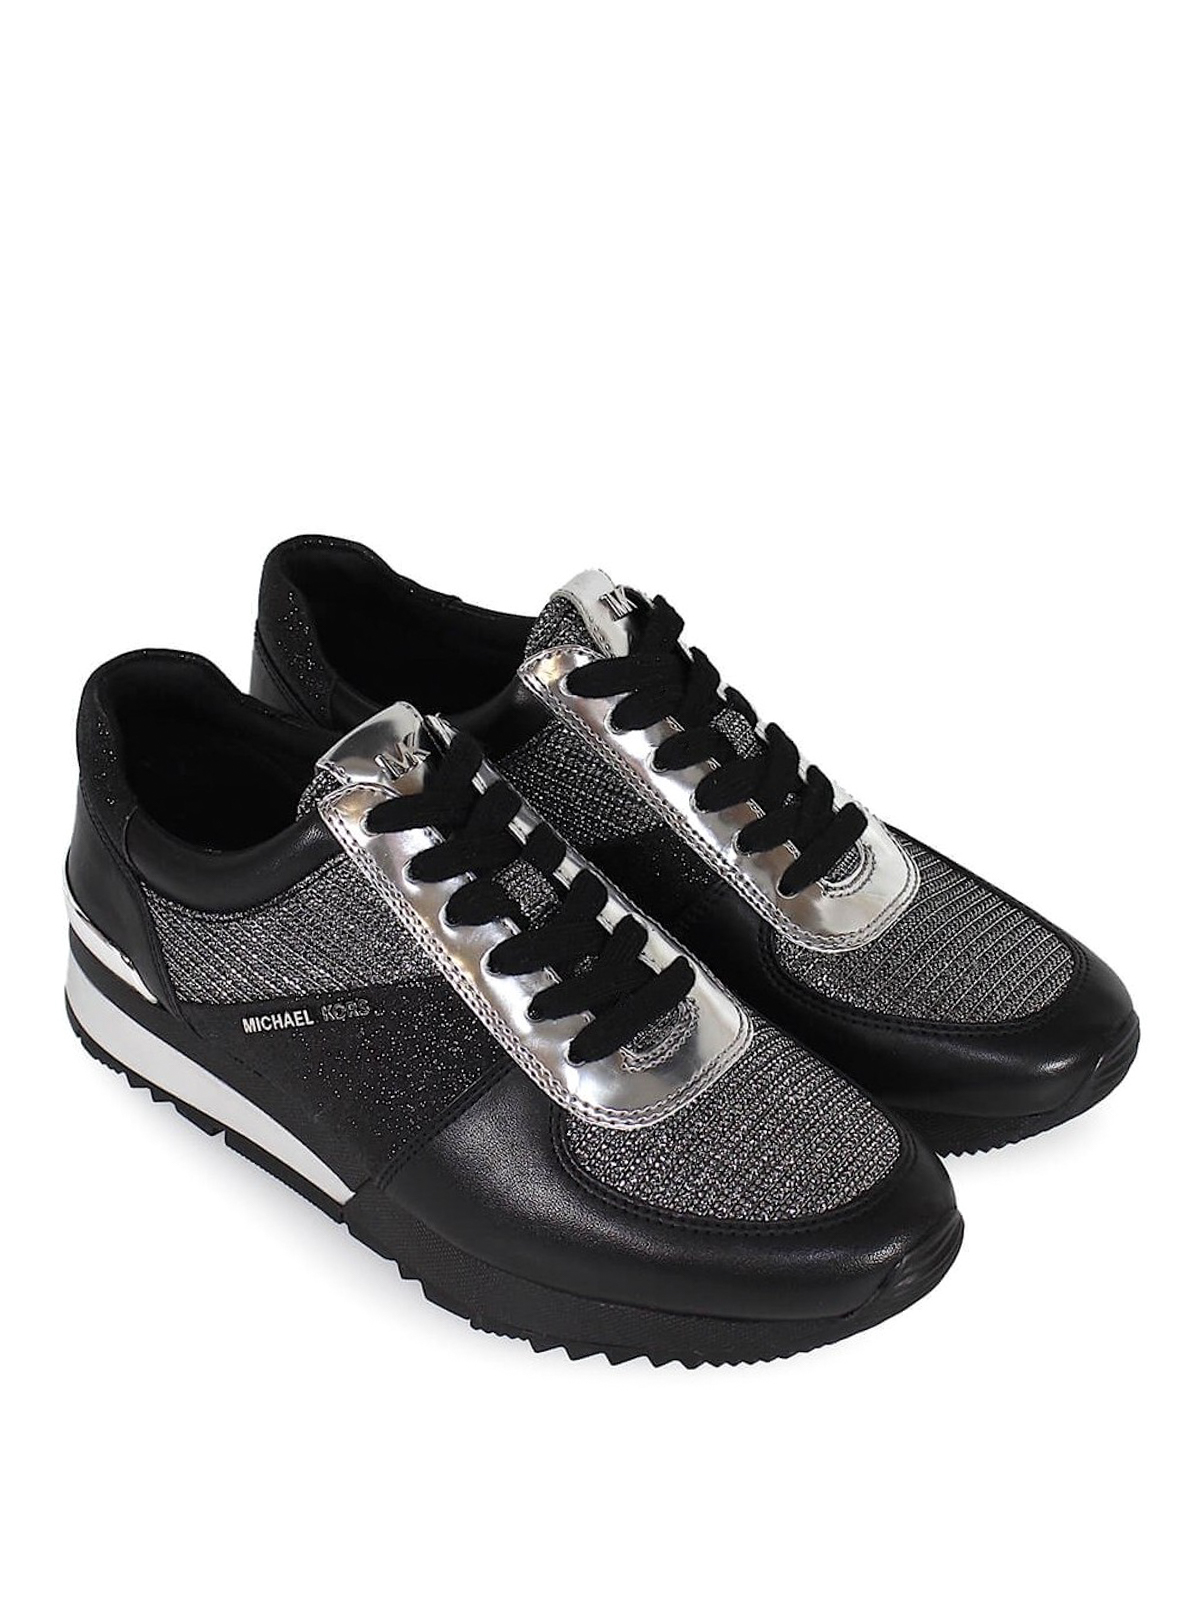 michael kors sneakers black and silver